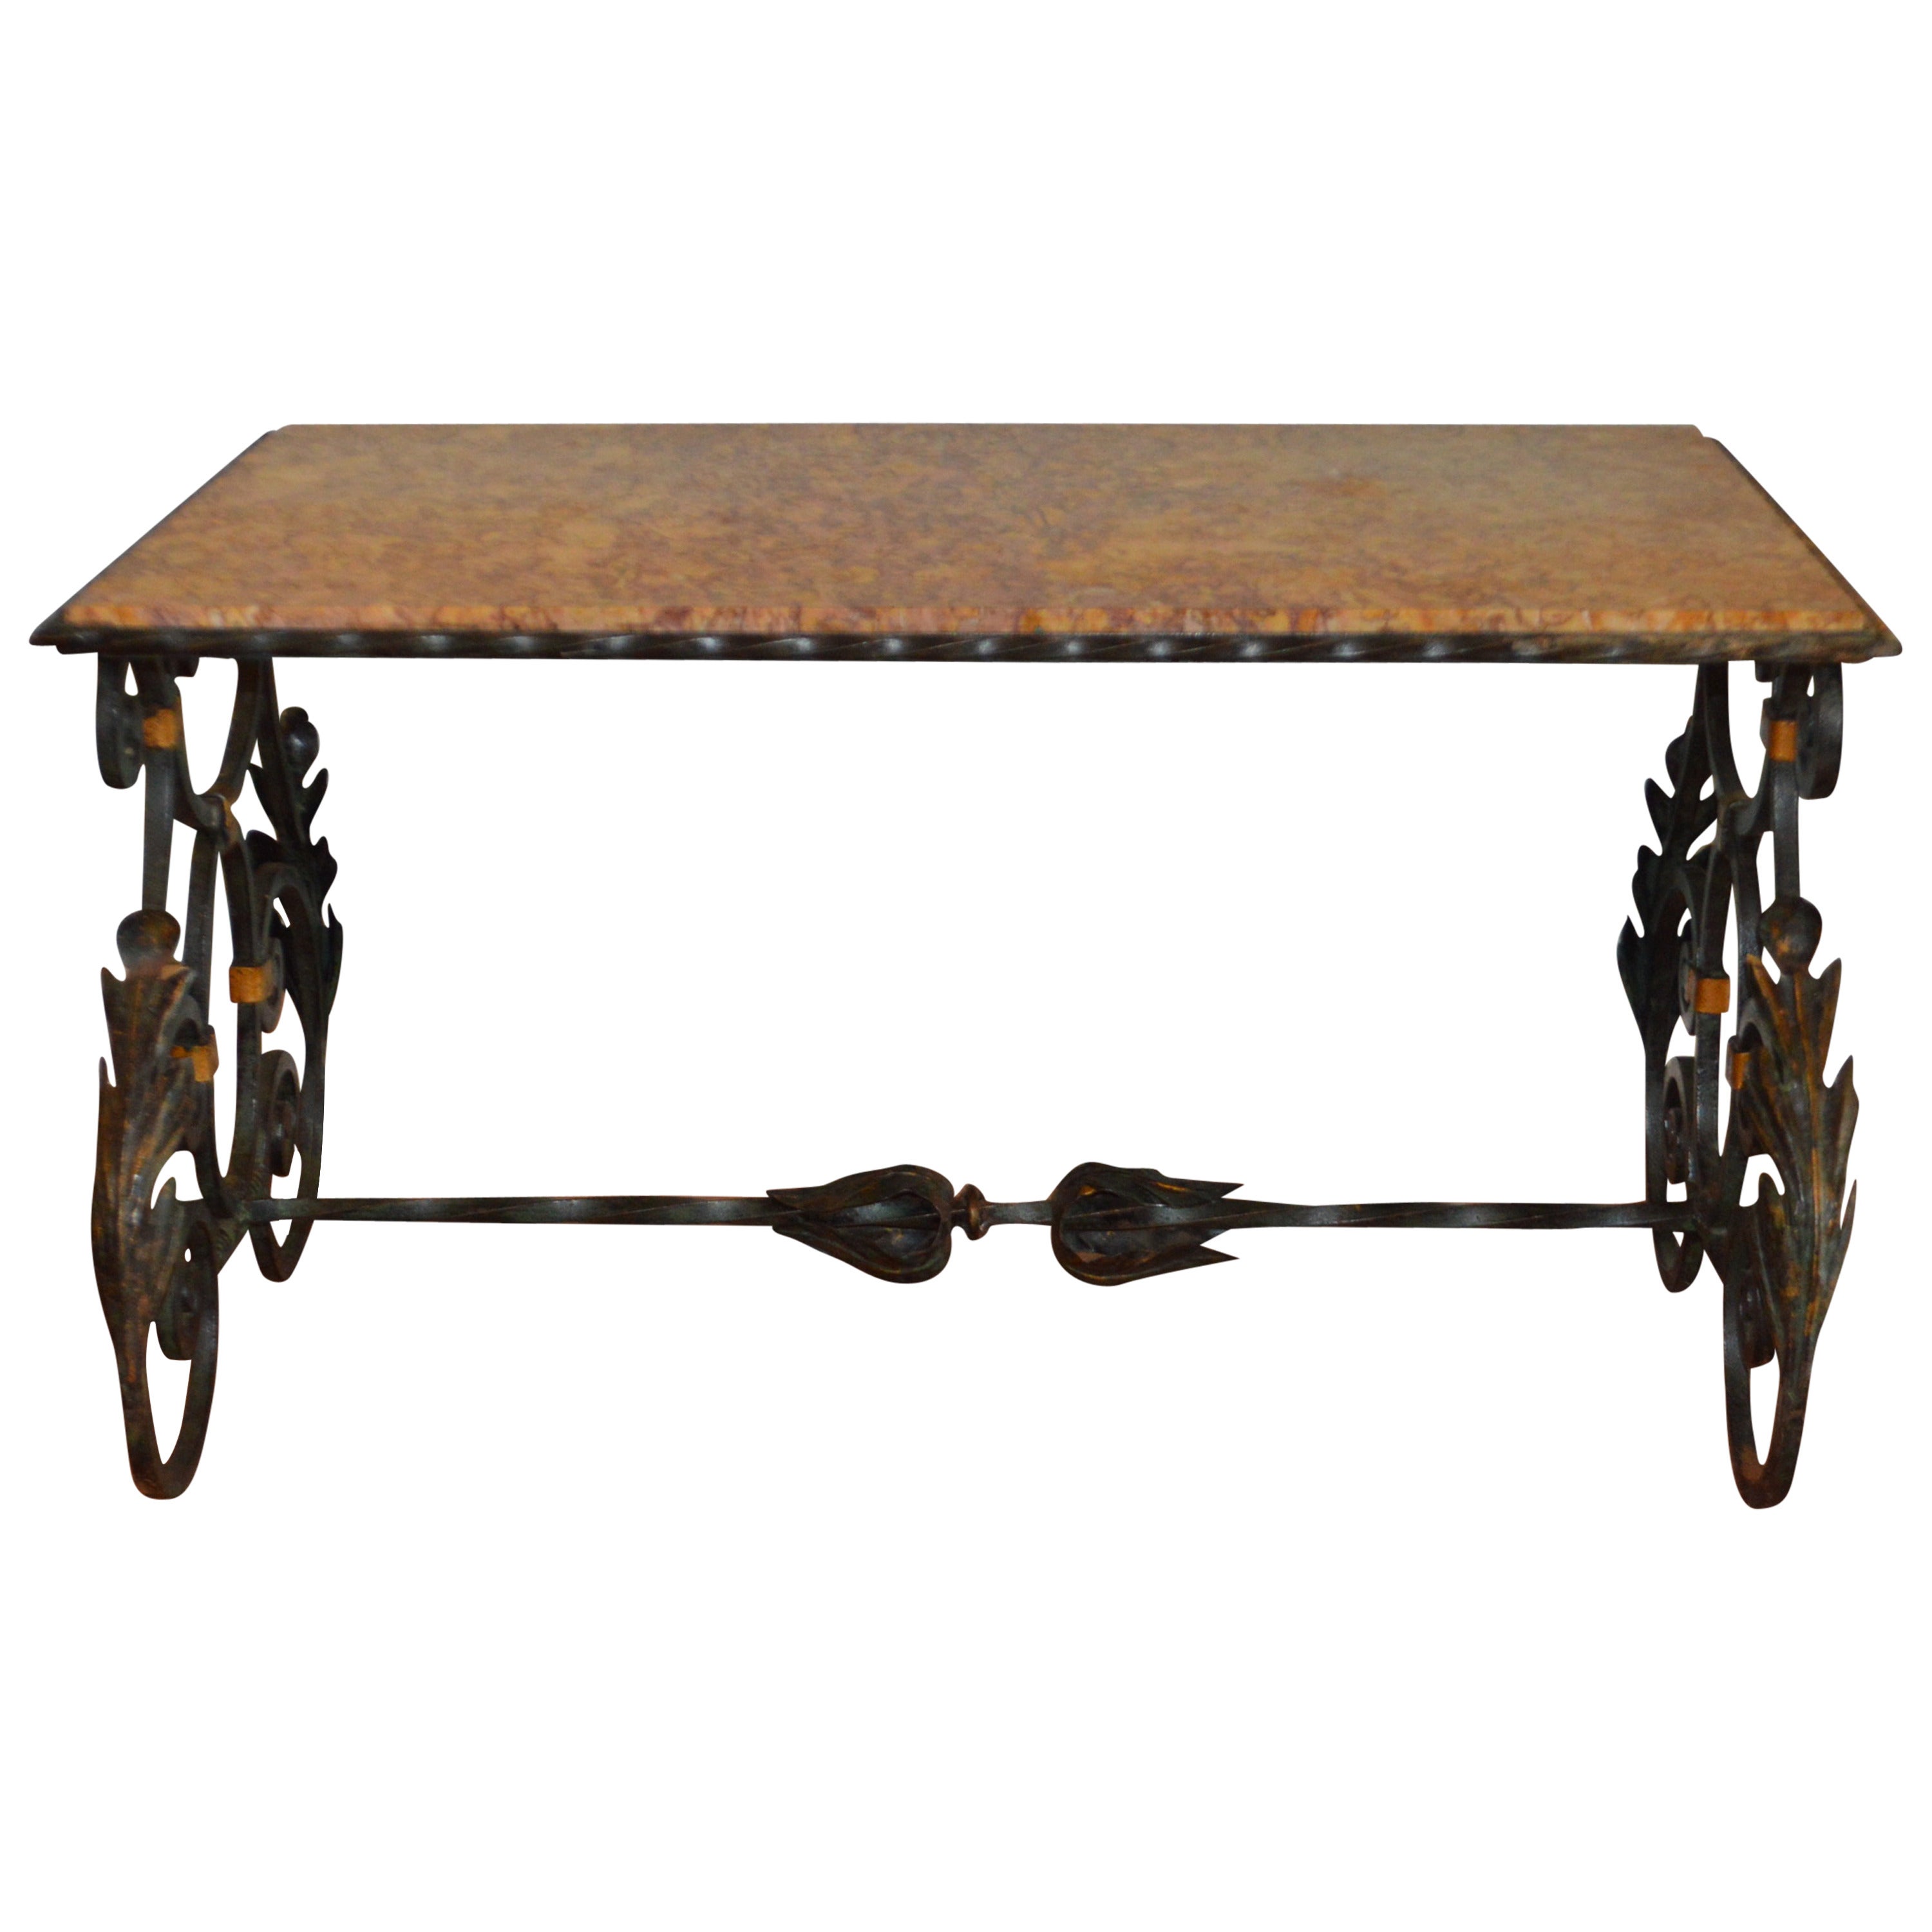 Belle Epoque wrought iron coffee table with marble top.